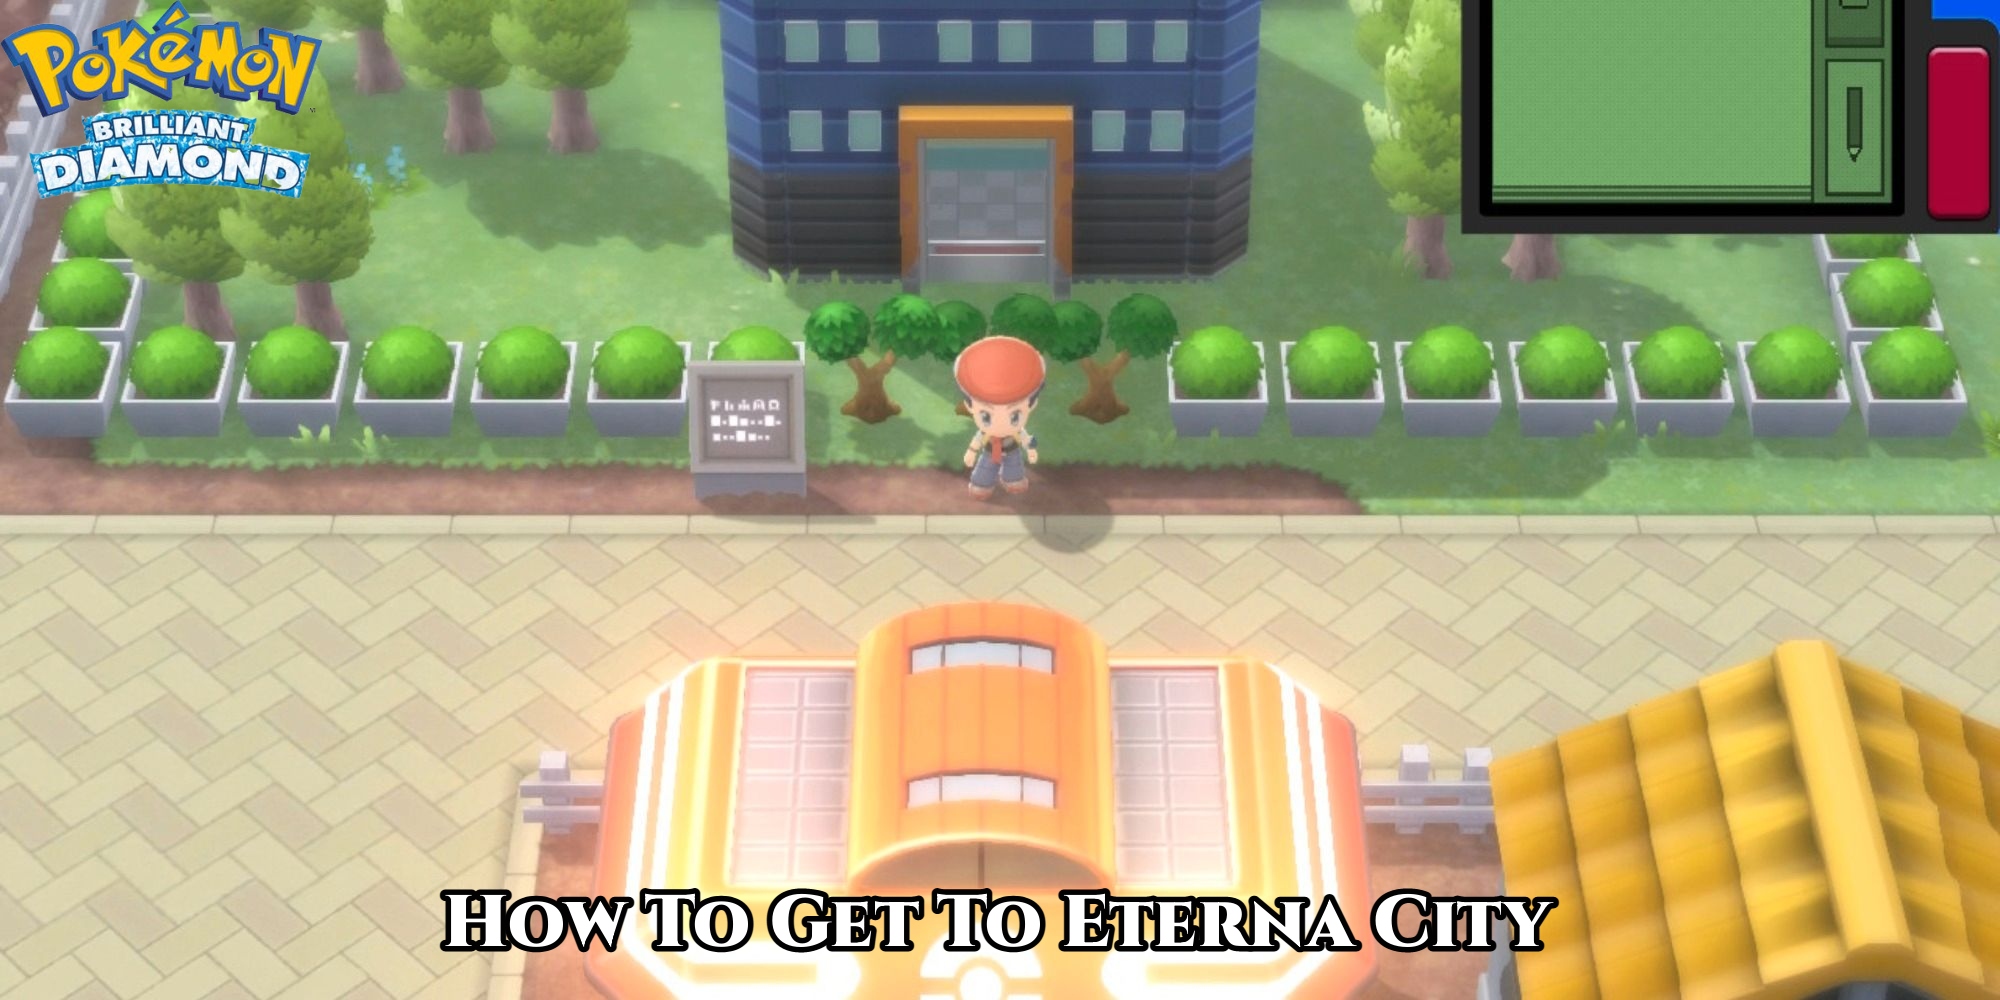 You are currently viewing How To Get To Eterna City In Pokemon Brilliant Diamond & Shining Pearl